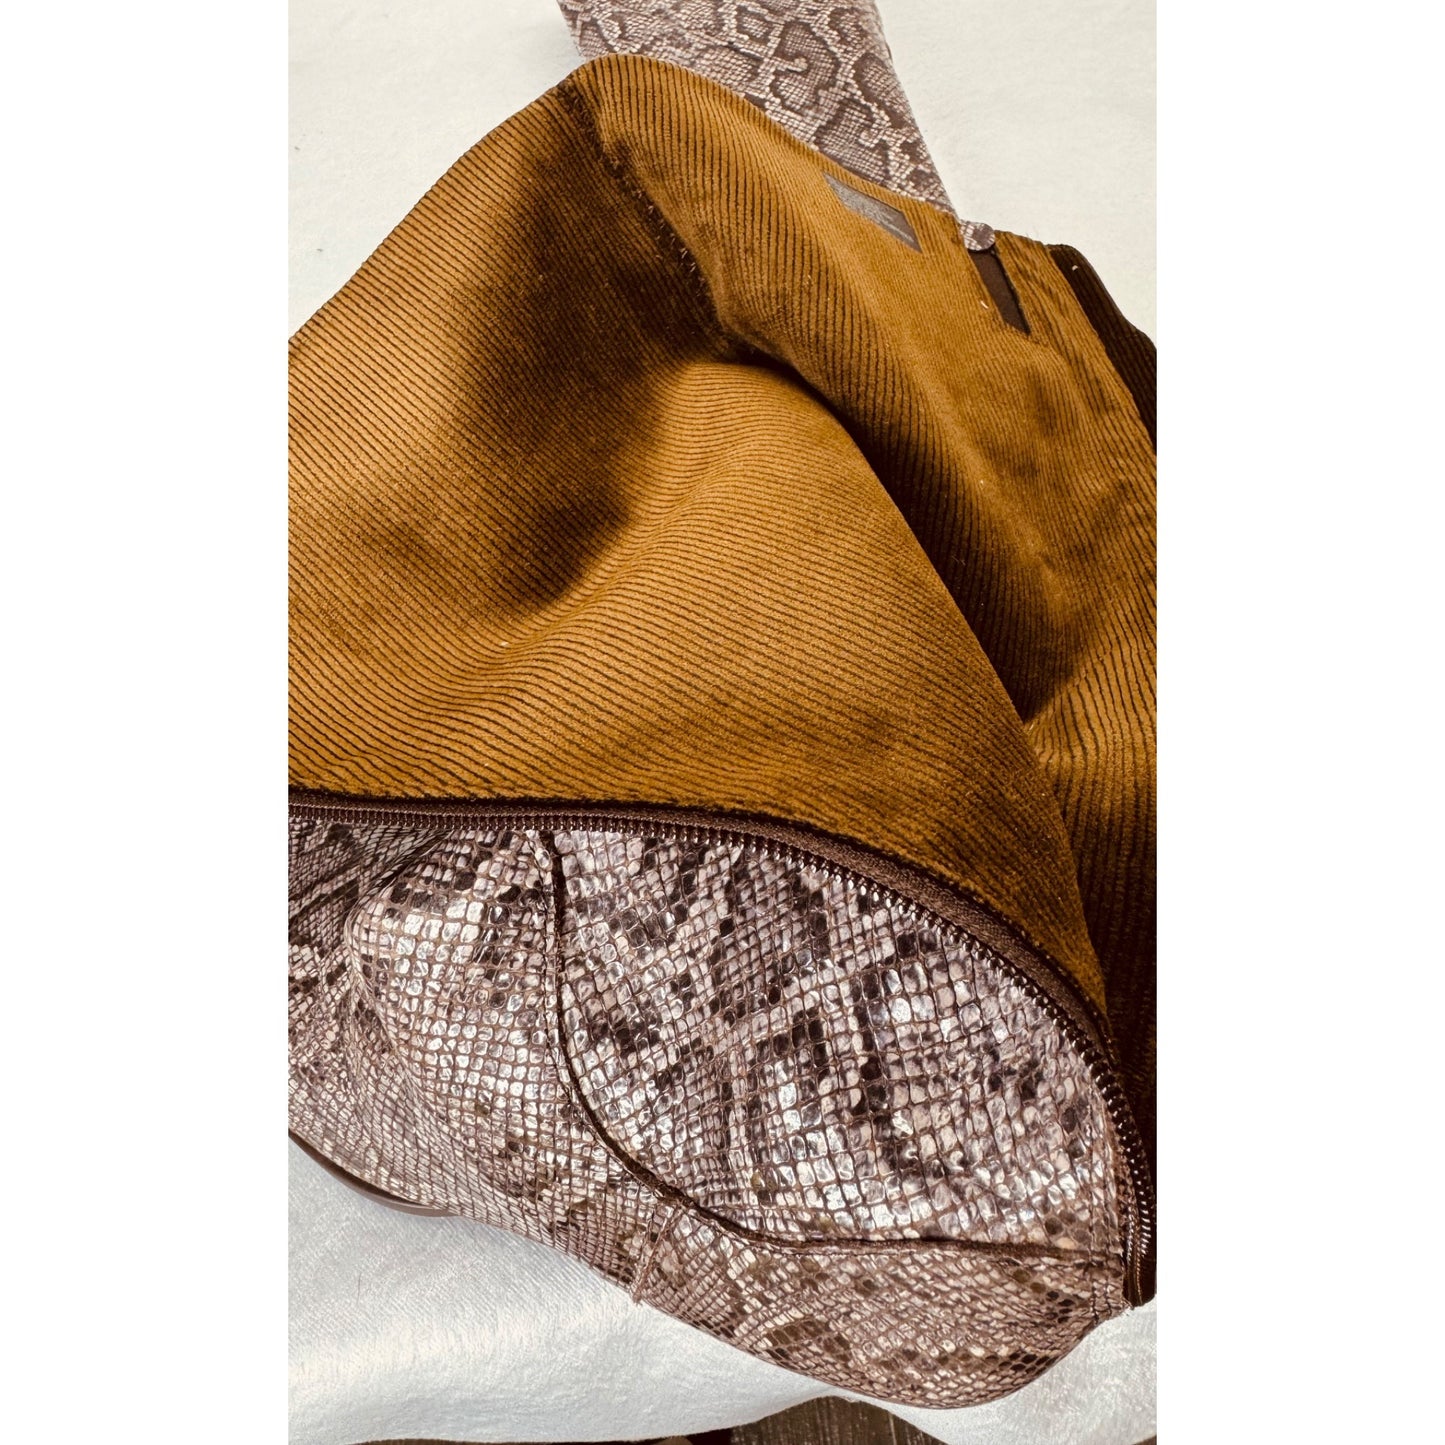 Born Womens Audrina Color: Brown Snake Print Style: F70257 Size 7